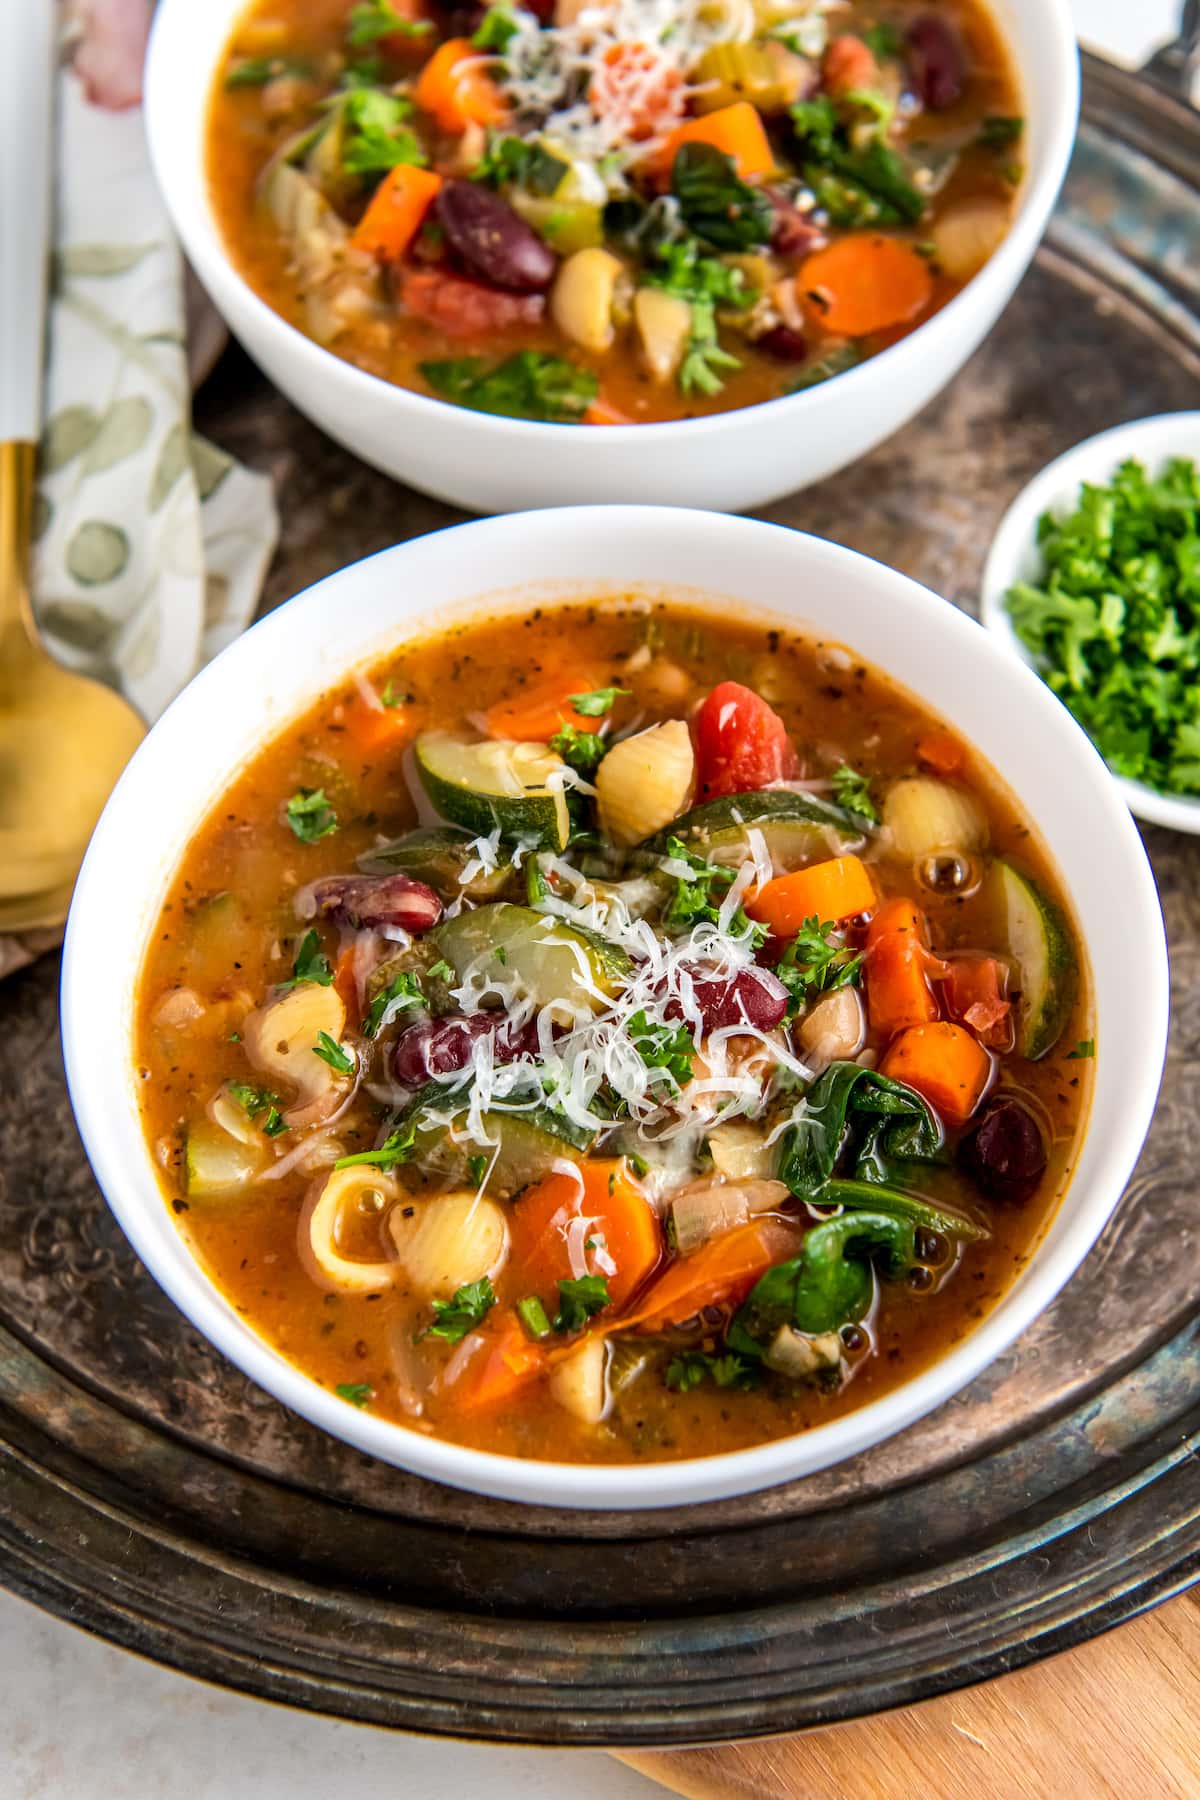 a bowl of minestrone soup with a rich tomato broth, vegetables, noodles, and cheese